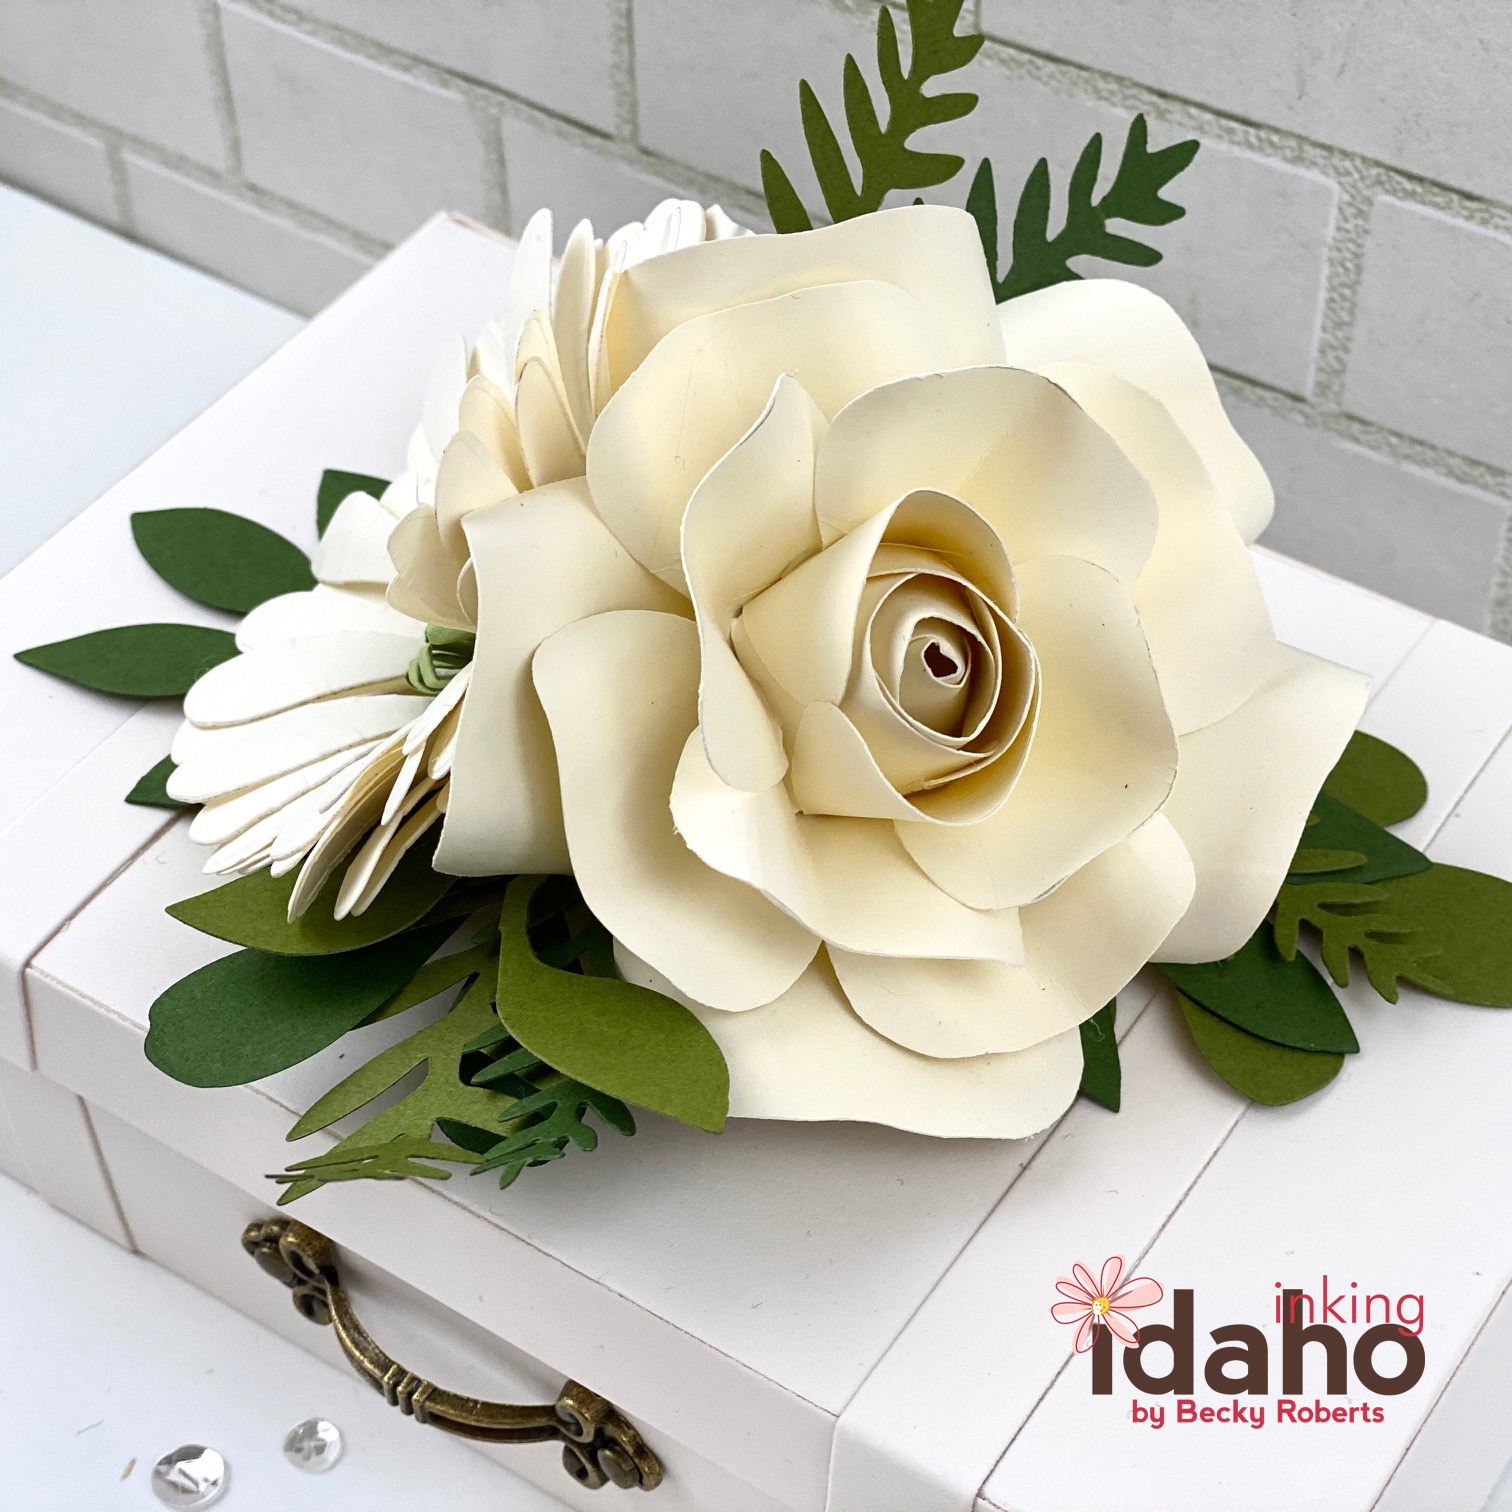 Inking Idaho: Suitcase and Floral Photo Prop